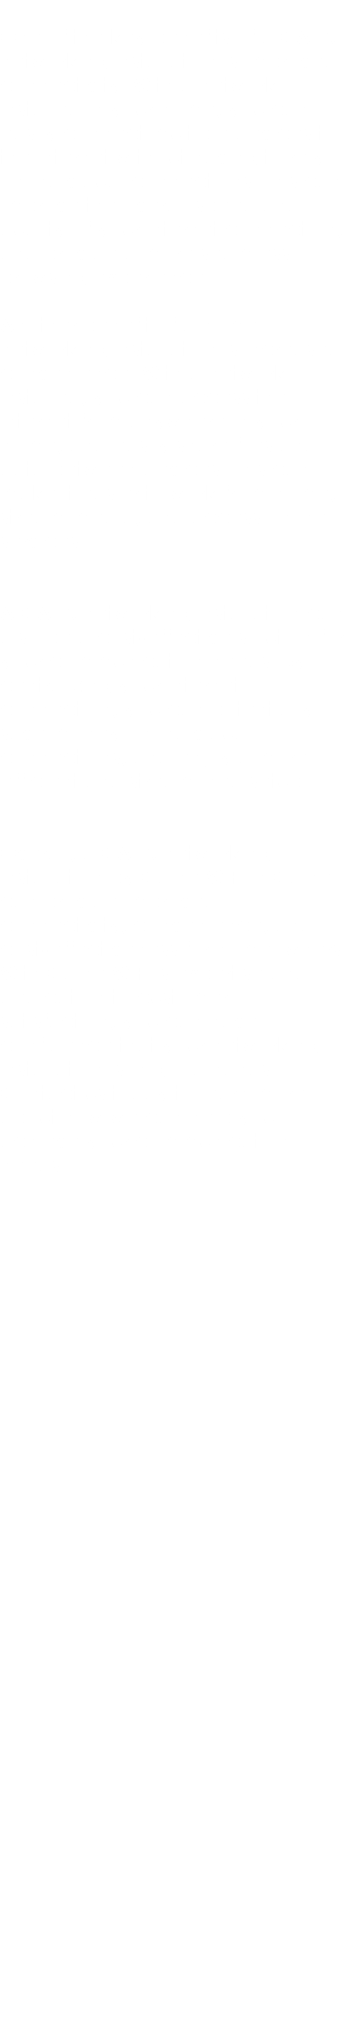  One of the key benefits of a CAT 5 networking installation is improved connectivity. With a network installed in your home, you can easily connect multiple devices to the internet without having to rely on individual connections. This can improve the overall speed and quality of your internet connection, and provide a more seamless browsing experience. Another benefit of a home networking installation is increased convenience. With a network installed, you can access the internet from anywhere in your home, and easily share files and data between devices. This can make it easier to work from home, stream media, and access online services. A CAT 5 networking installation can also be a cost-effective solution for your communication needs. By centralizing your internet connection, you can potentially save money on individual connections, and enjoy a more efficient and streamlined setup. Overall, a CAT 5 networking installation by Calne WiFi in Calne can provide improved connectivity, convenience, and cost-effectiveness for homeowners. With Calne WiFi 's expertise and dedication to customer satisfaction, you can have confidence that your networking installation is in good hands. Contact us today to learn more about how we can help you achieve your communication needs.